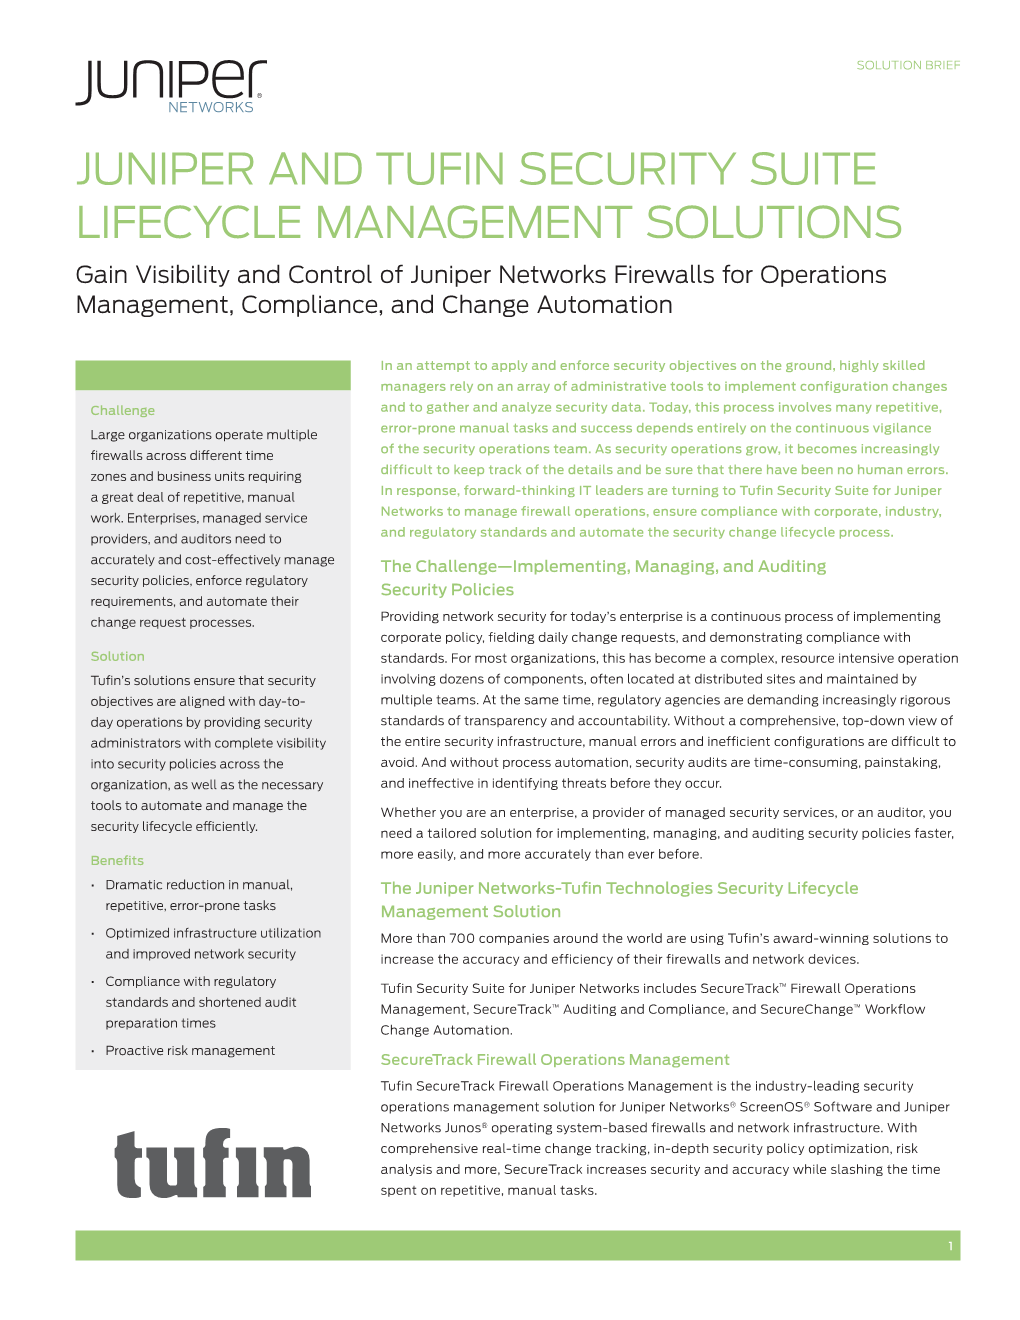 Juniper and Tufin Security Suite Lifecycle Management Solutions